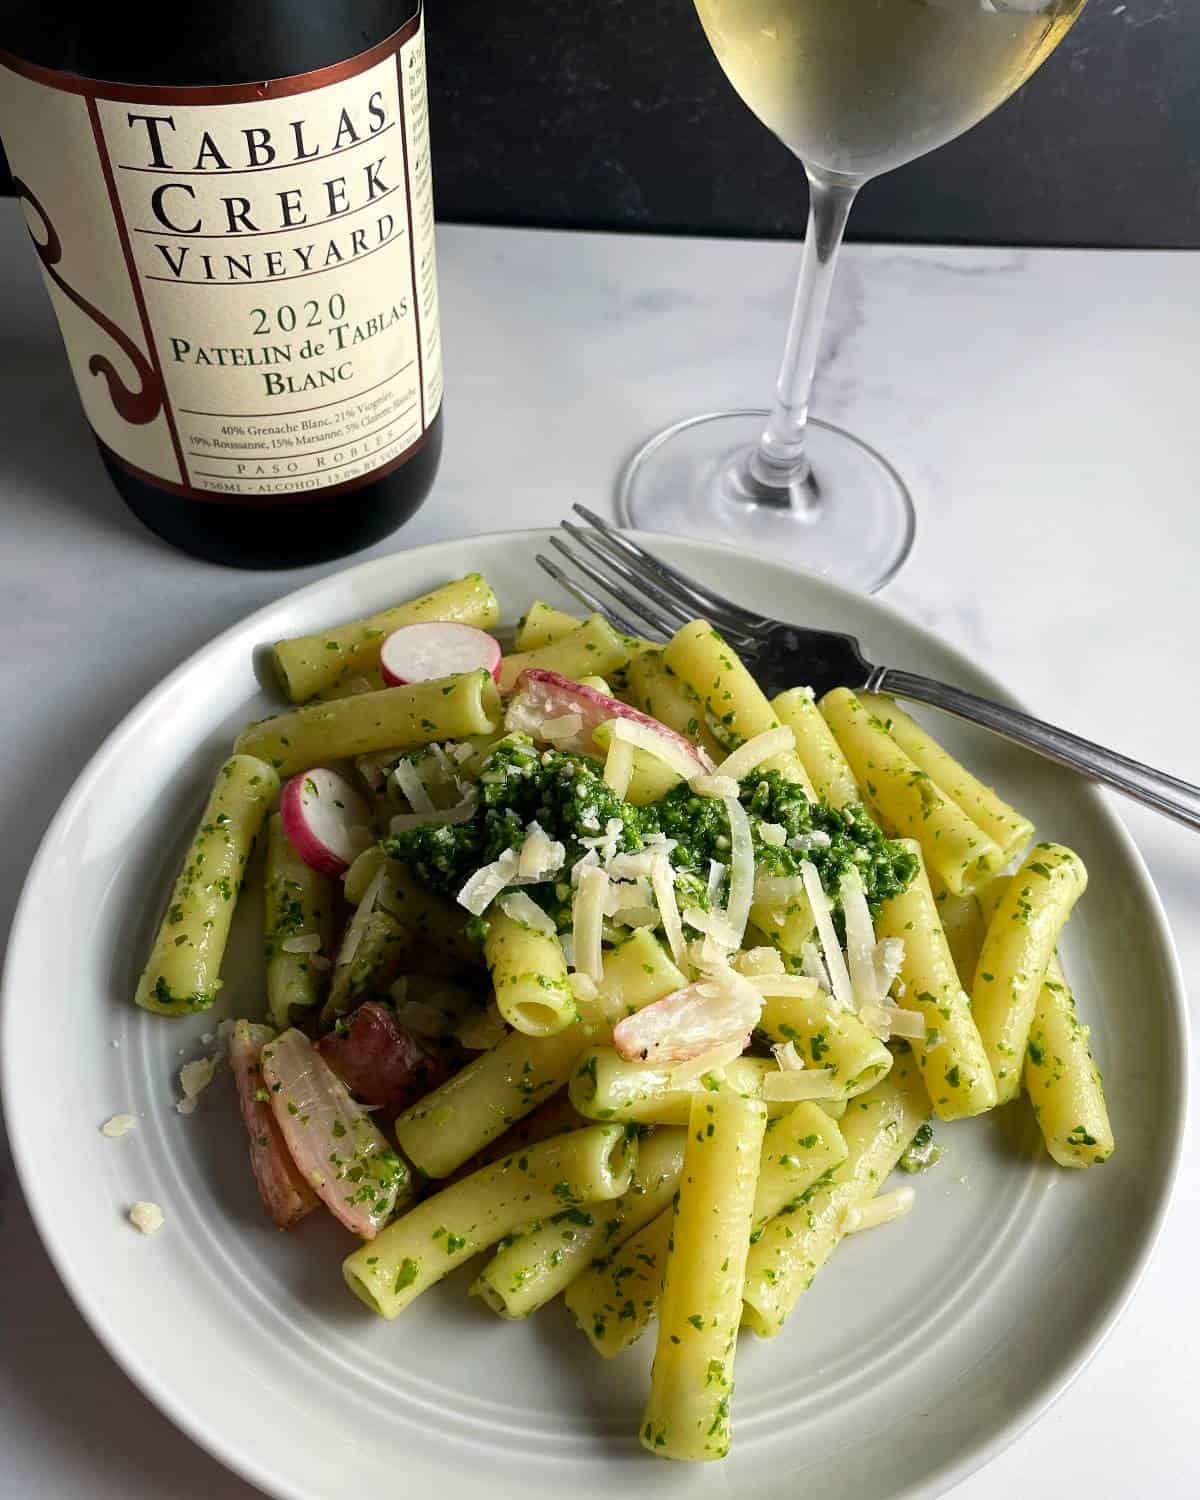 Ziti pasta tossed with radish green pesto and roasted radishes. Served with a white wine. 